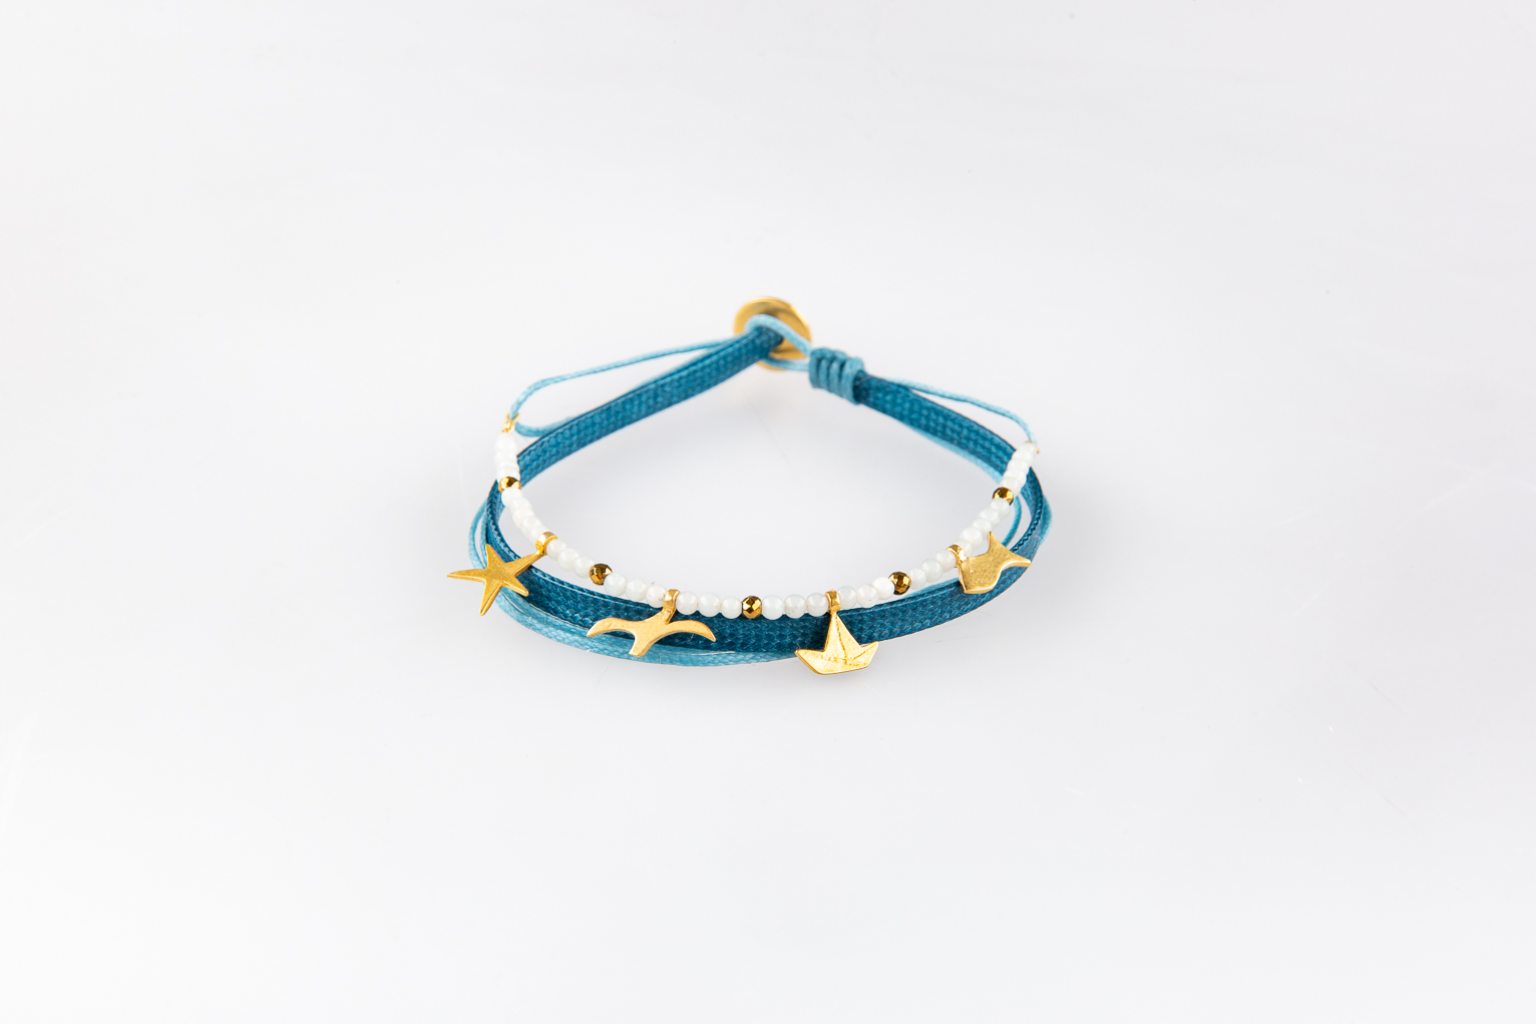 Bracelet with gold-plated charms and beads